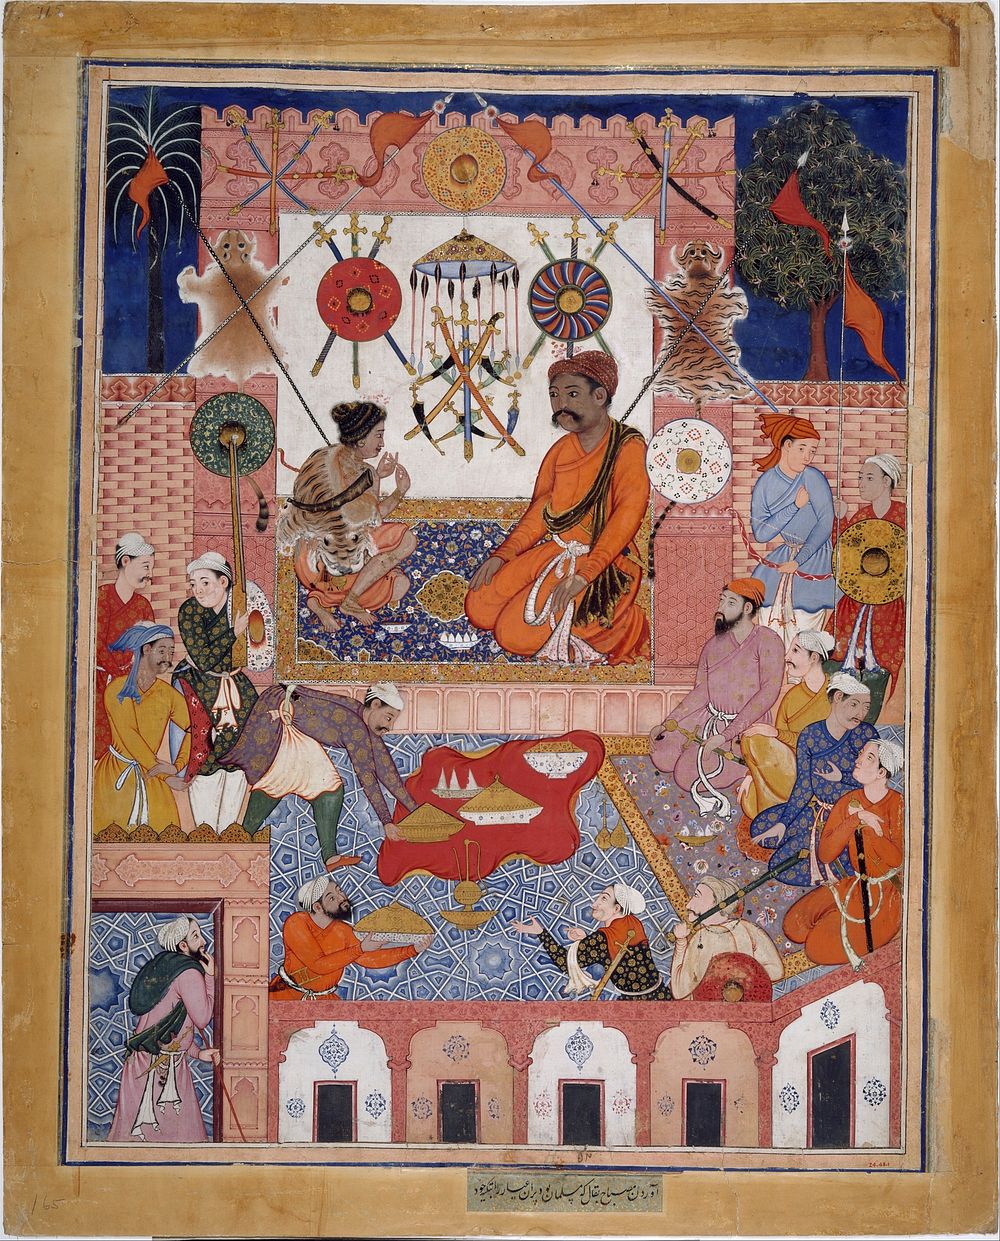 "Misbah the Grocer Brings the Spy Parran to his House", Folio from a Hamzanama (The Adventures of Hamza) attributed to…